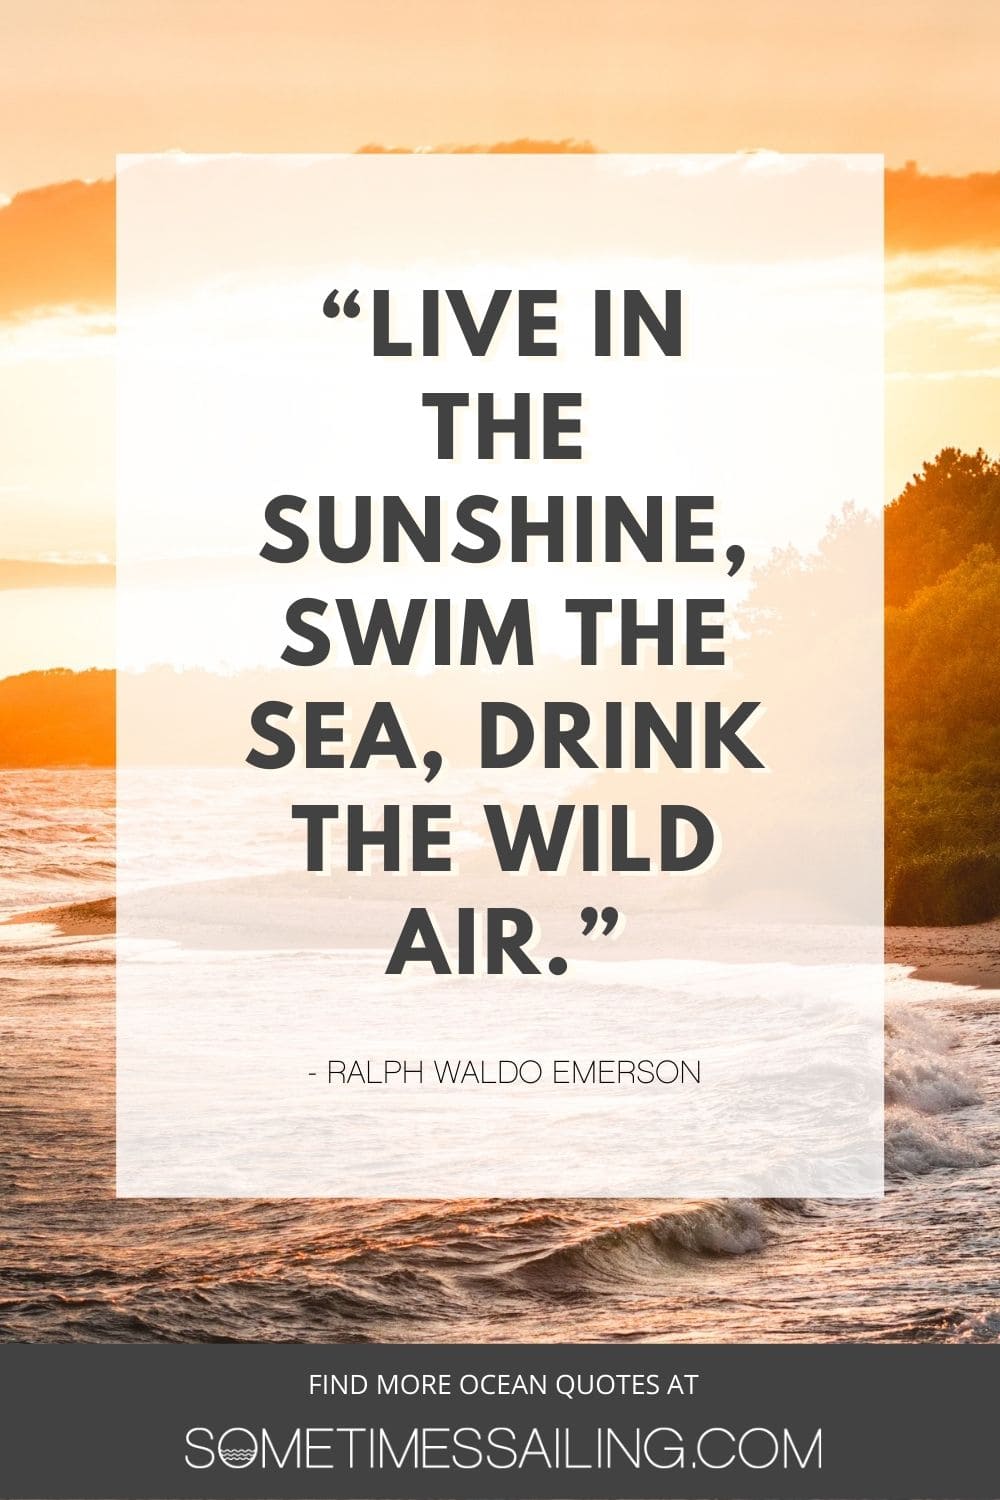 Inspirational ocean quote with a photo of a beach sunset during golden hour behind it.